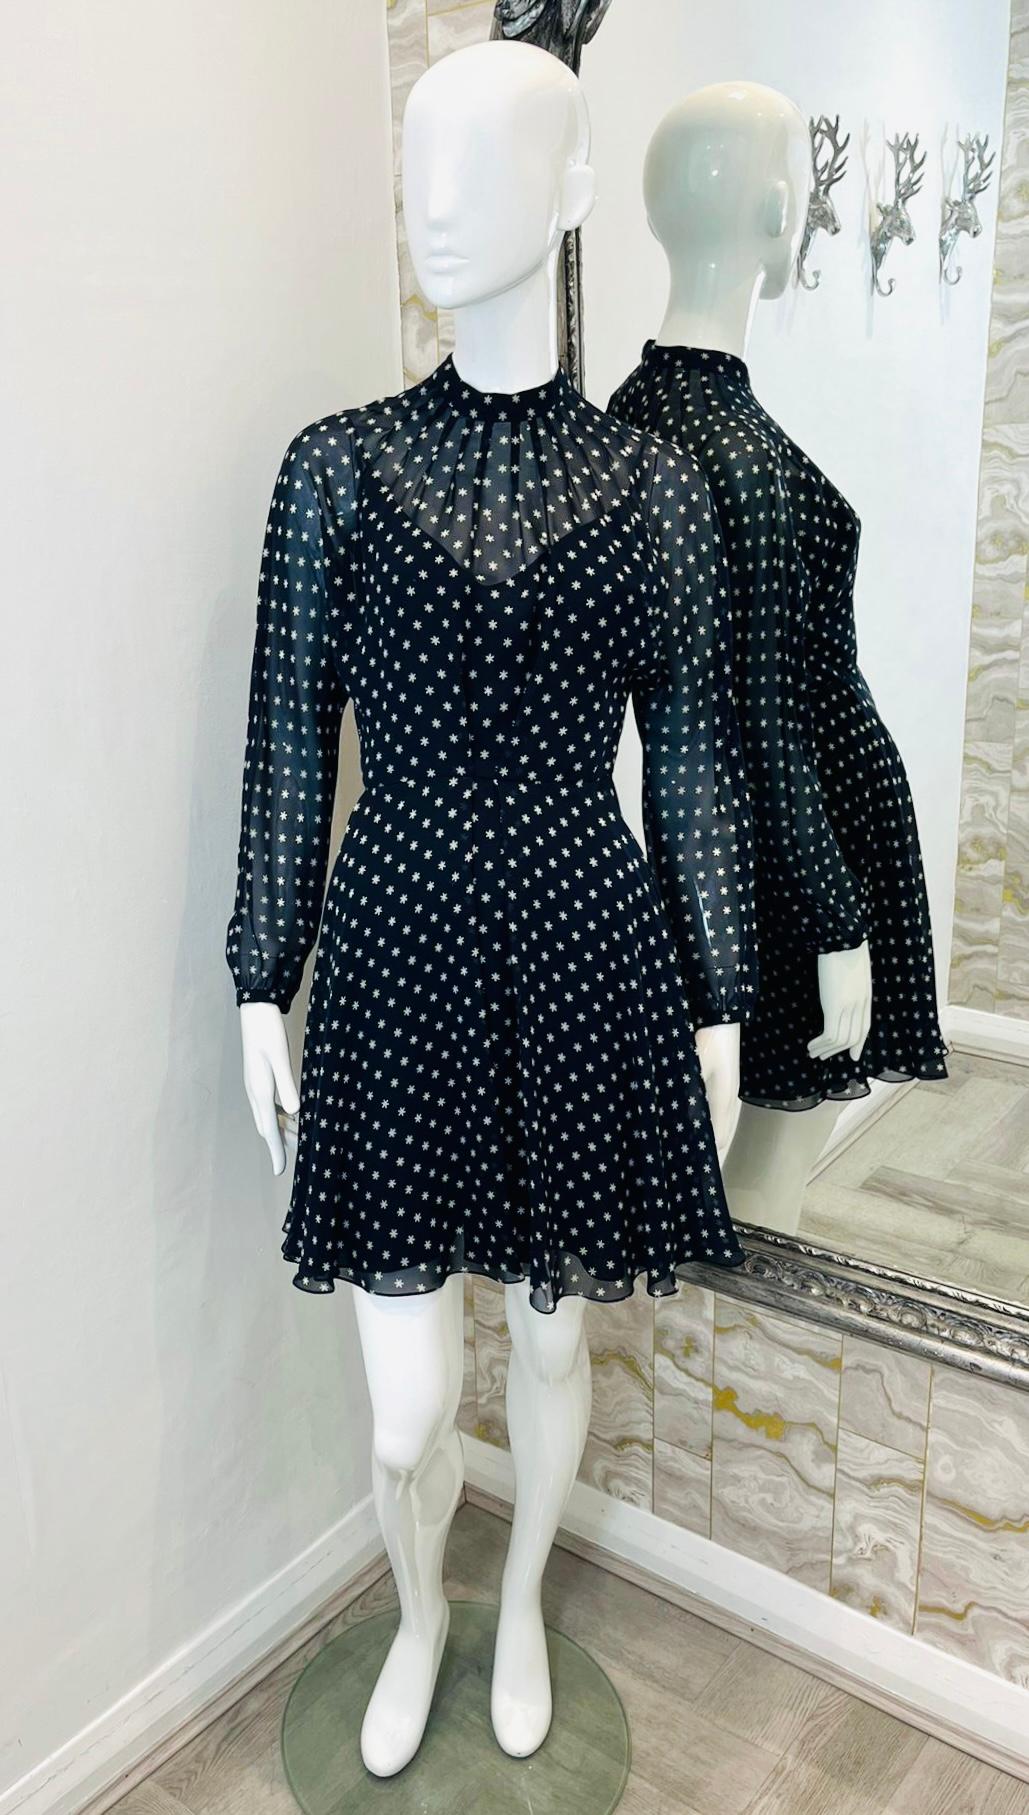 Christian Dior Polka Dot Silk Dress

Black, mini dress designed with polka-dot print in white.

Featuring standing collar, and see-though detailing to the neckline and sleeves.

Detailed with pleated, A-Line skirt and concealed zip closure to